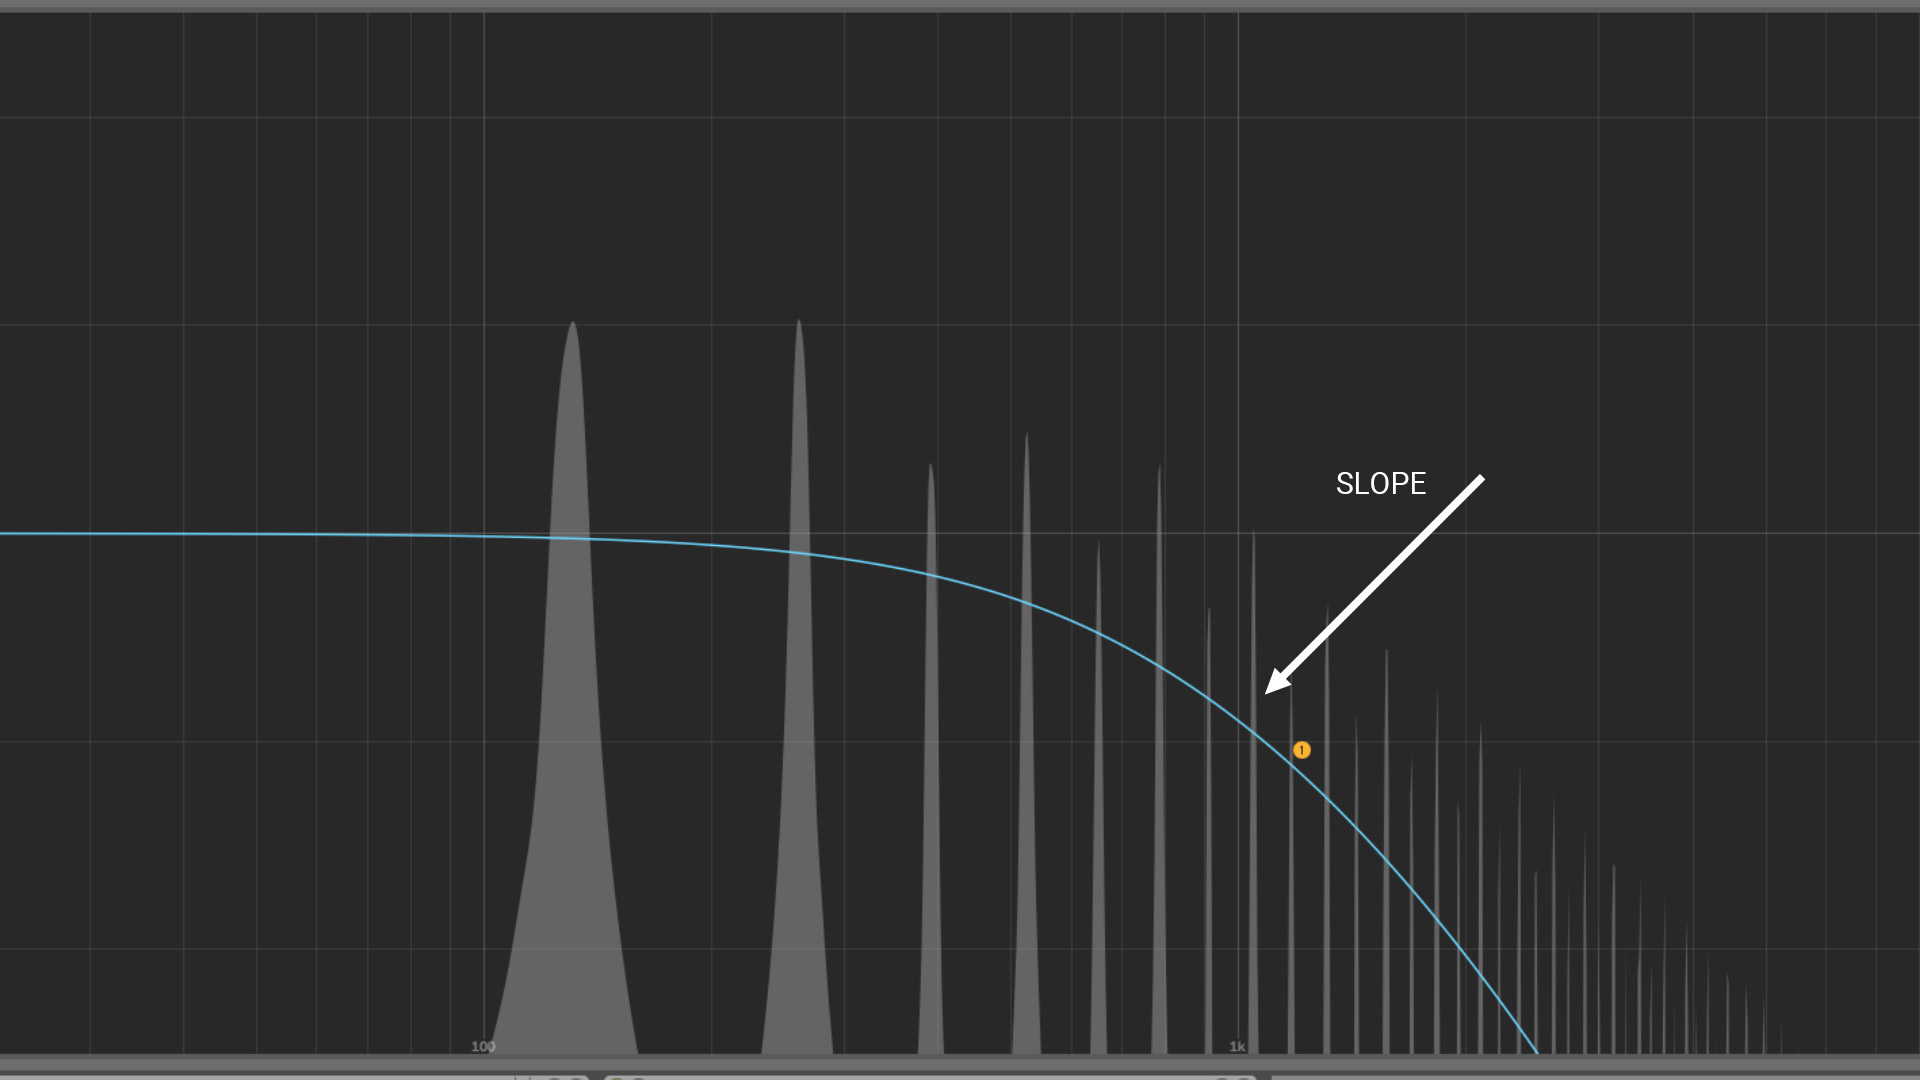 Screen shot showing the slope of a filter in Ableton Live.